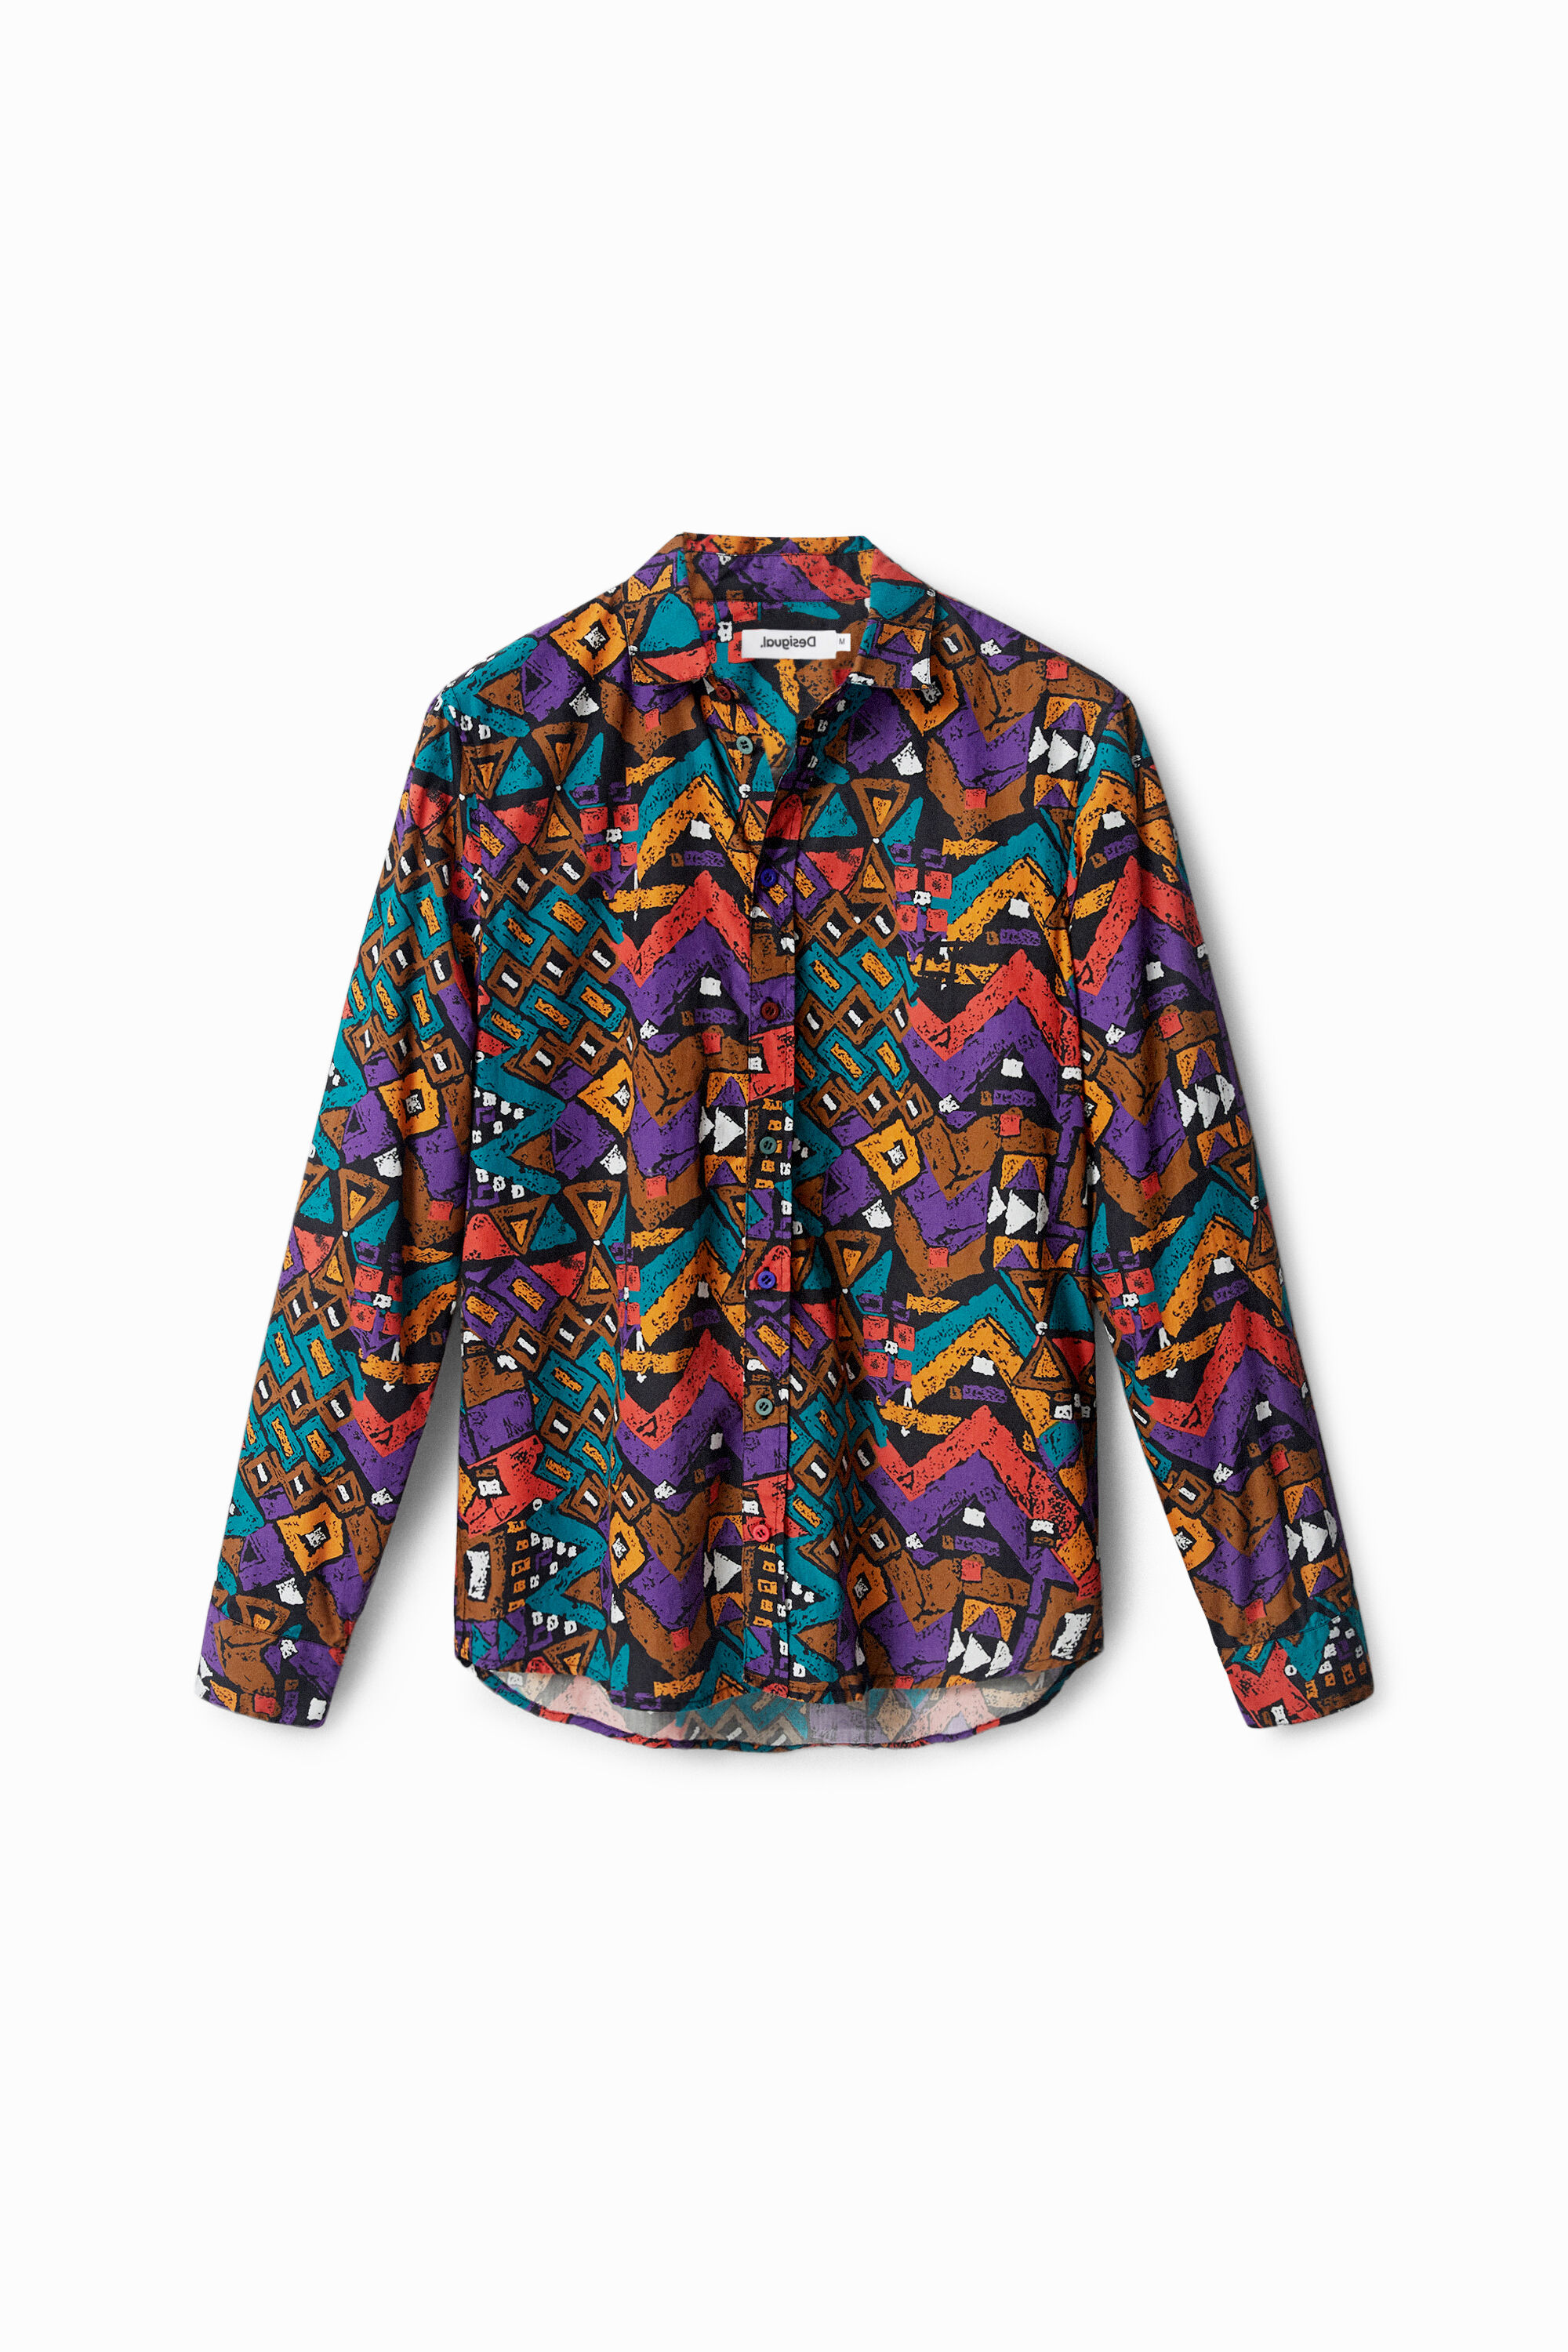 Desigual Long-sleeve Geometric Shirt In Material Finishes